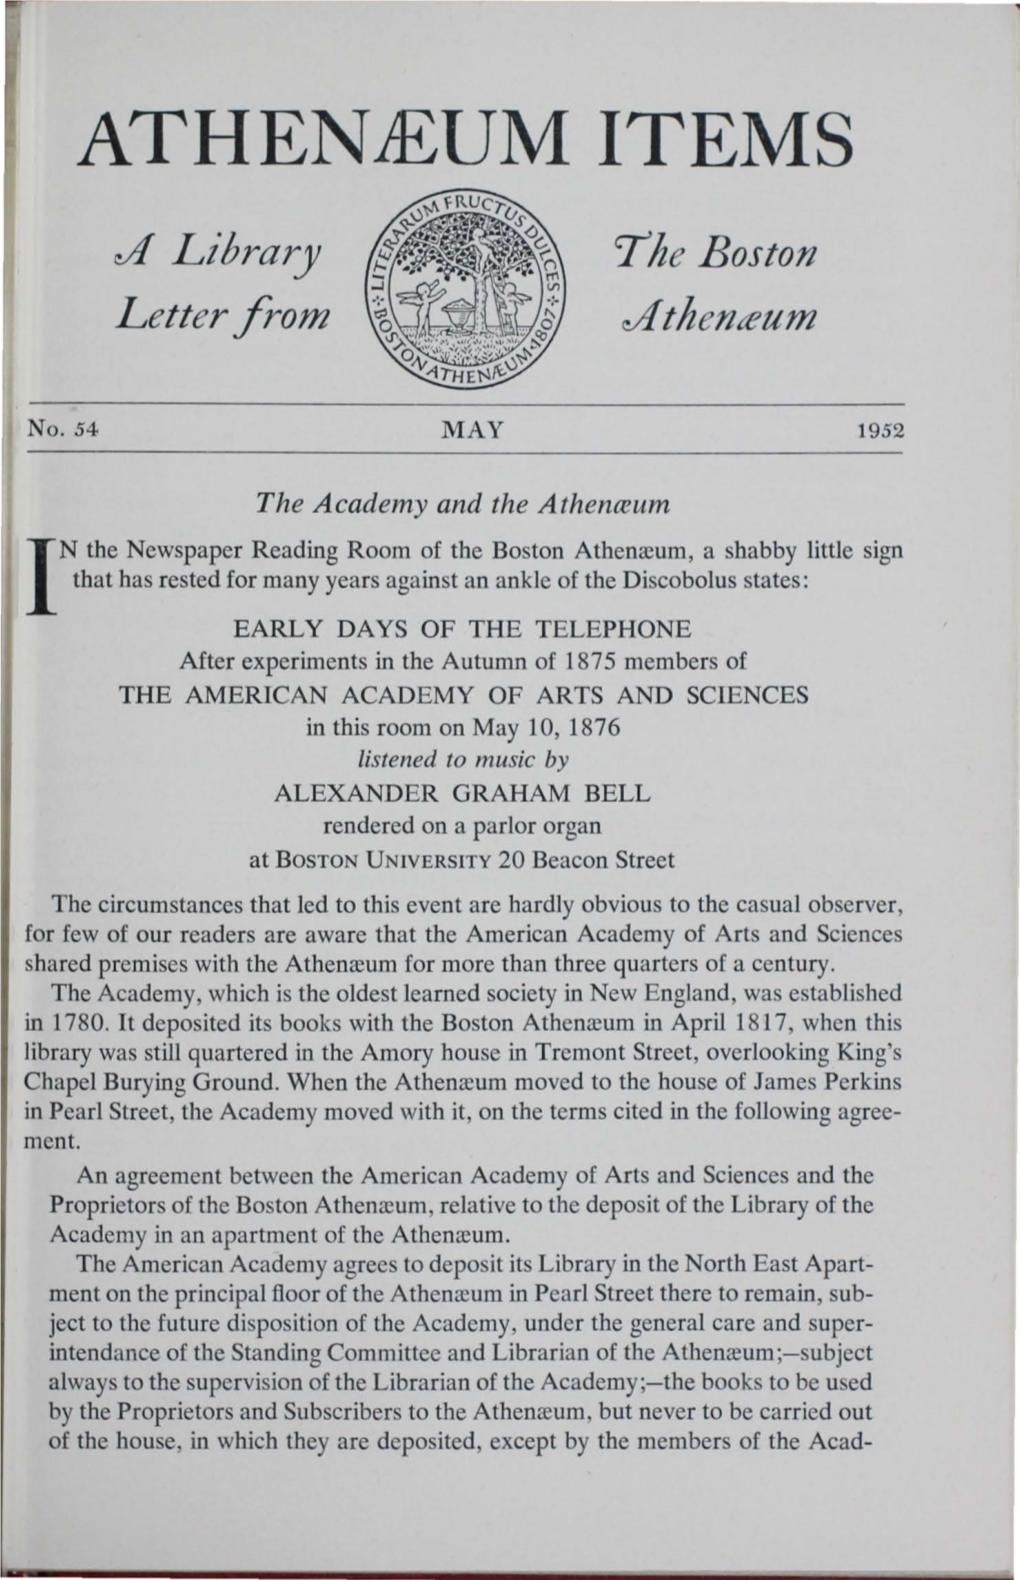 U1 Library Letter from the Boston Ulthenteum